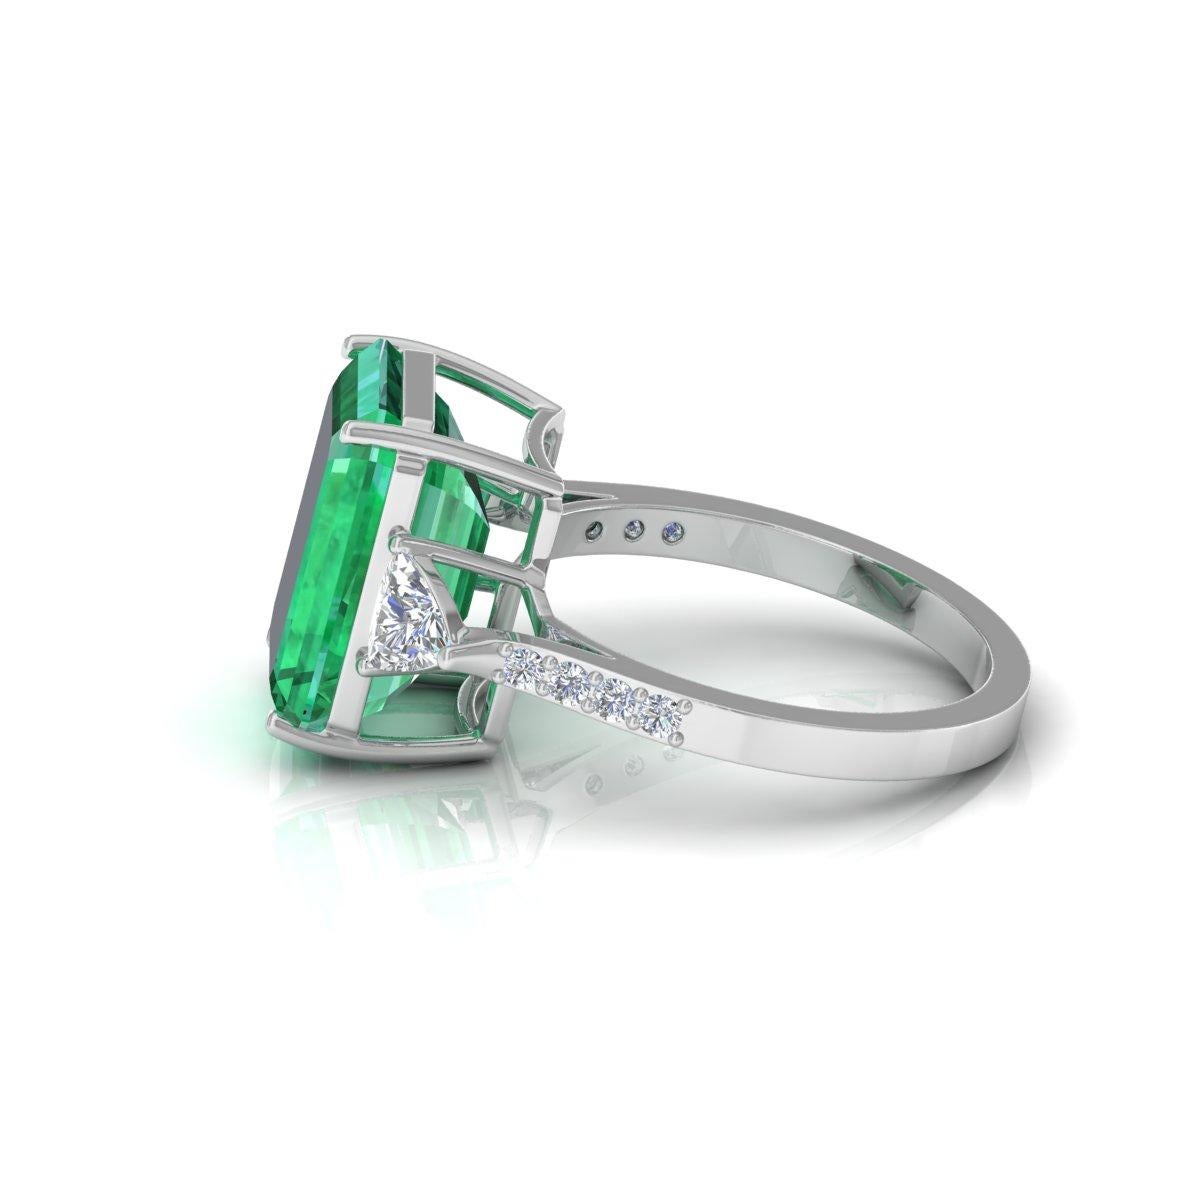 For Sale:  Natural Emerald Gemstone Ring Trillion Cut Diamond Solid 18k White Gold Jewelry 7